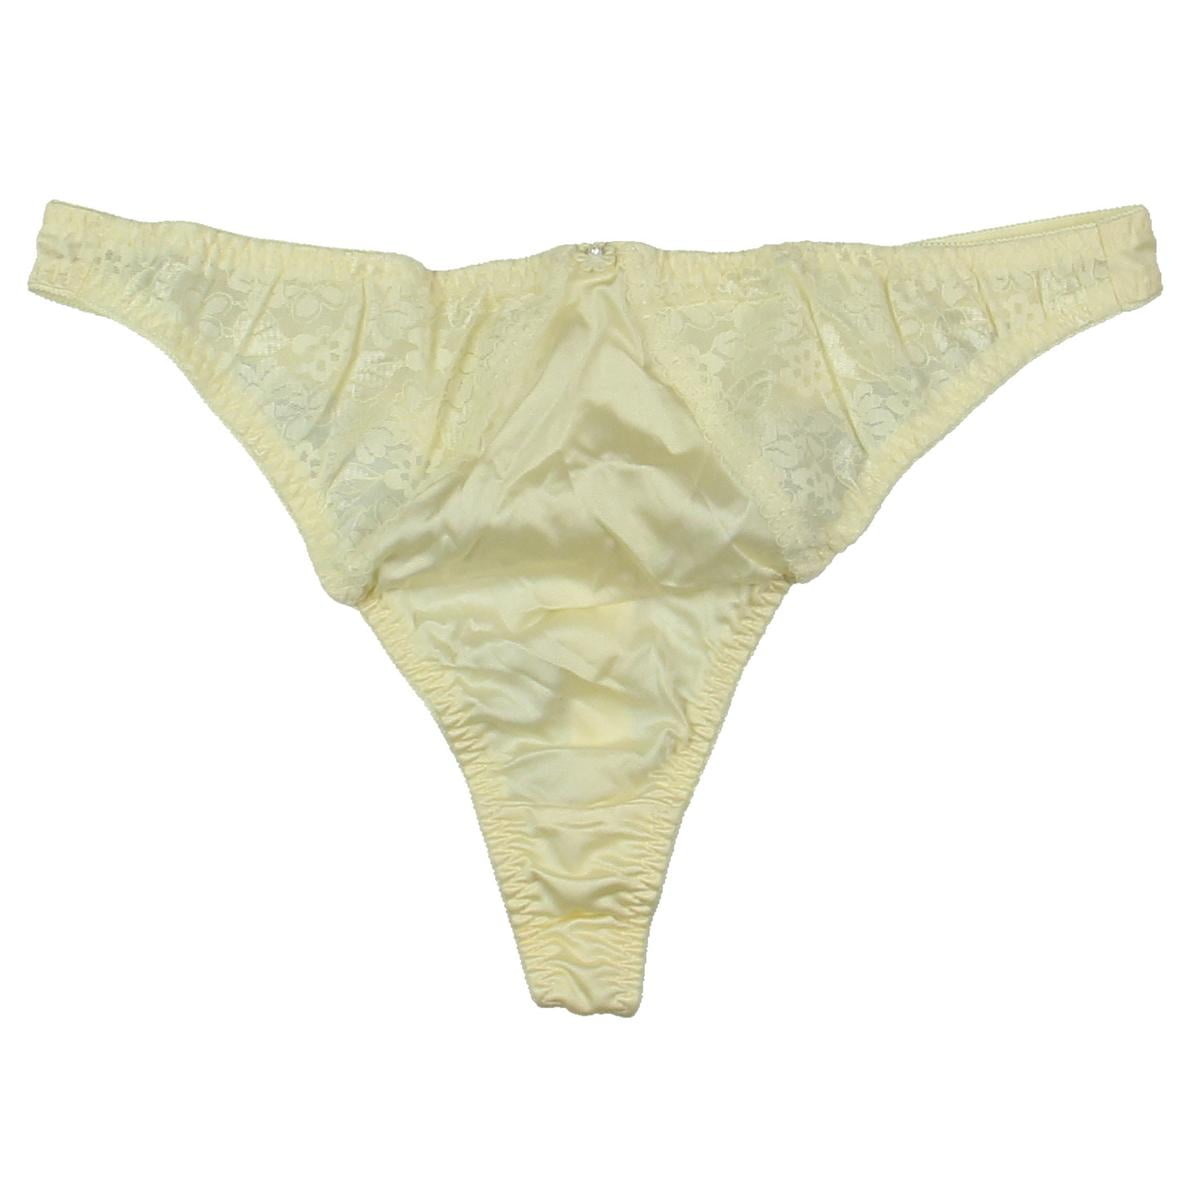 Dominique Lace Trimmed Thong Style 349 Ivory Medium 